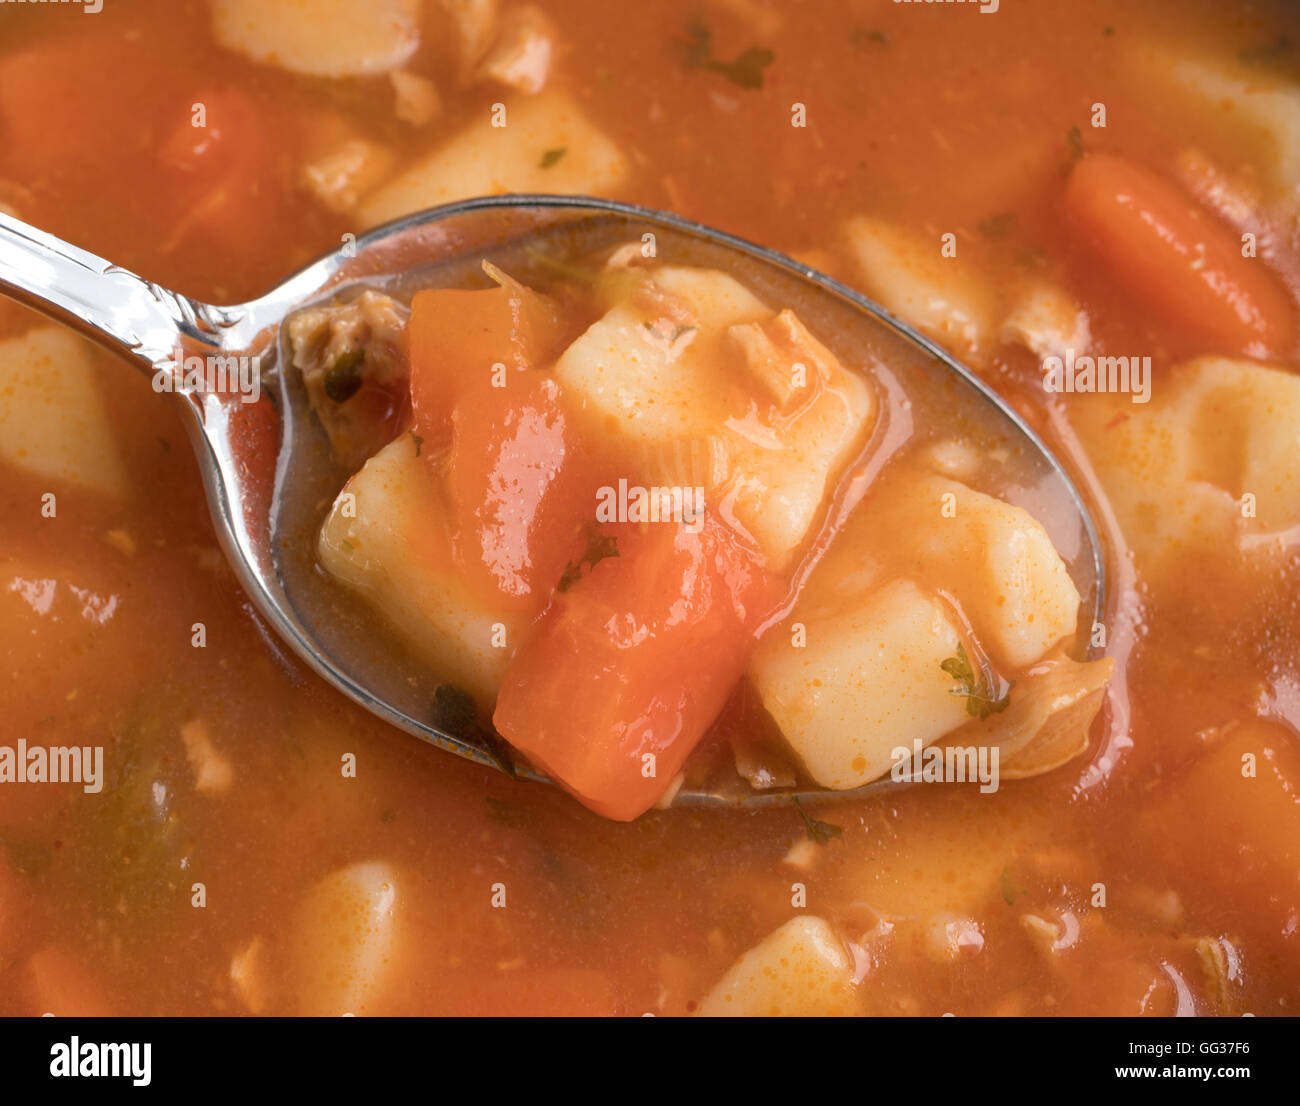 A spoonful of Manhattan style clam chowder atop the stew. Stock Photo